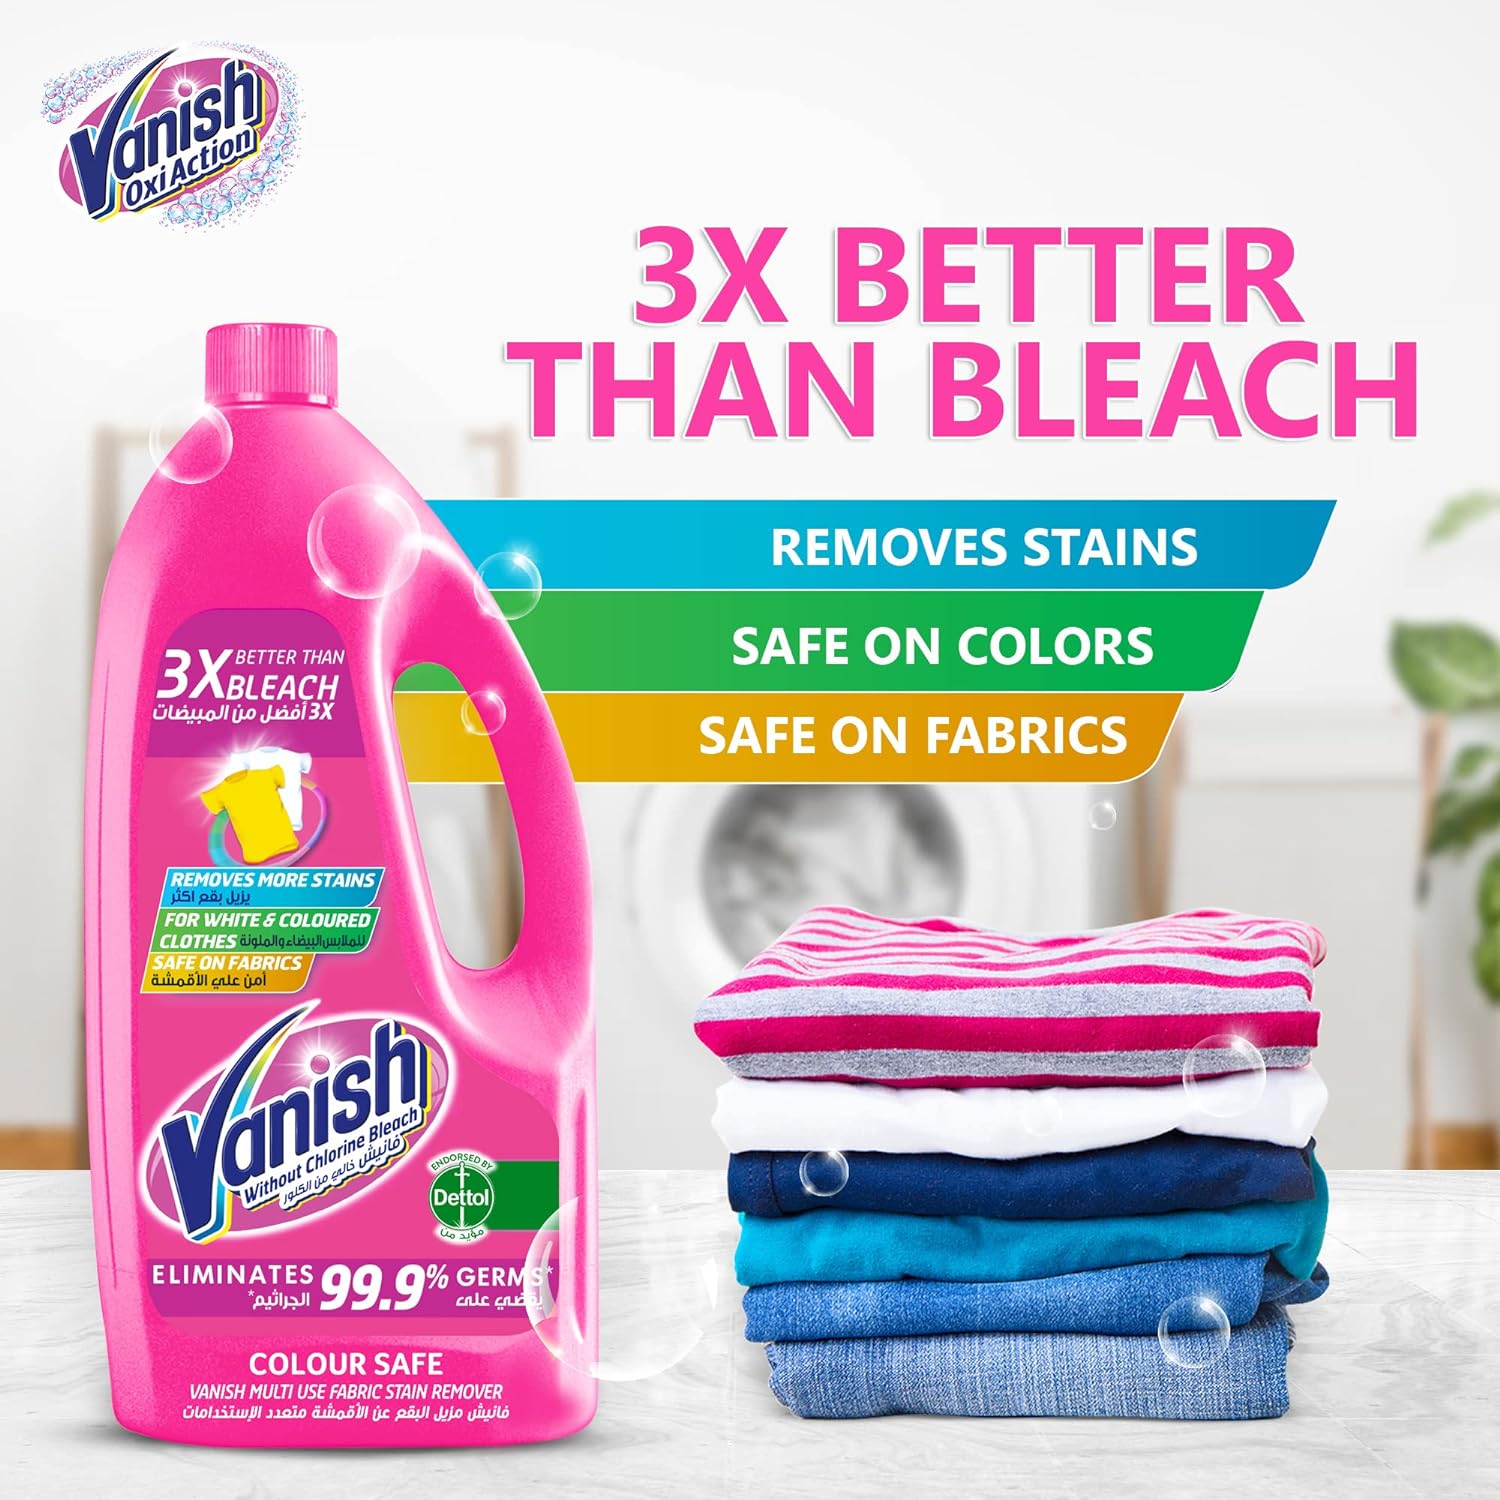 Vanish Stain Remover Pink 3L + 1L Free | Pack of 4